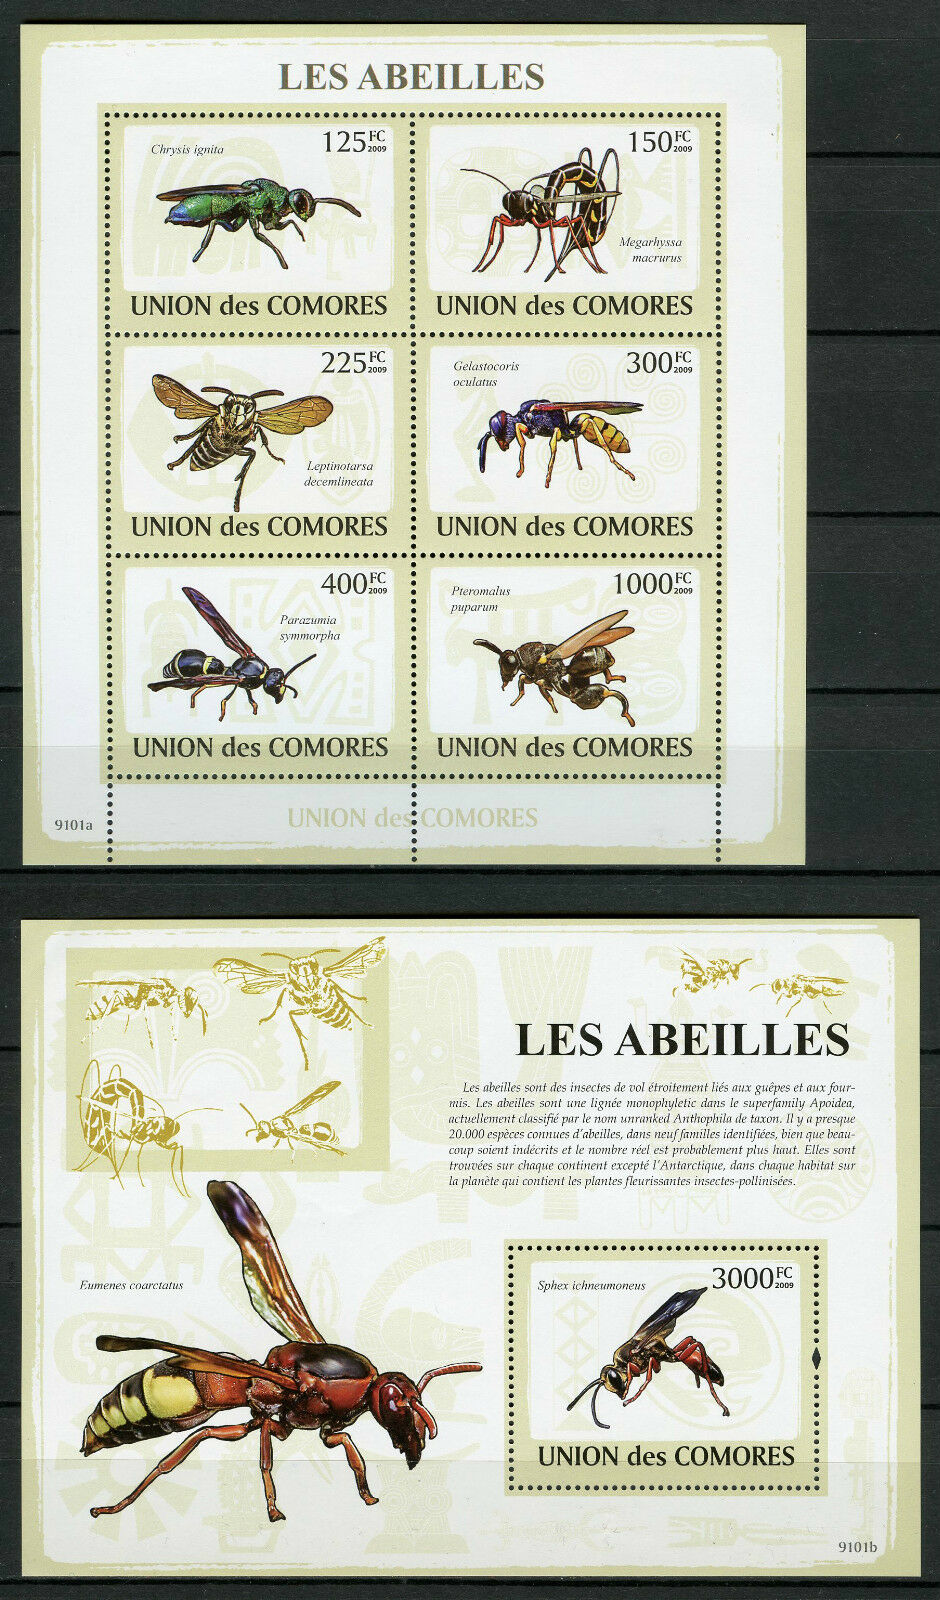 Comoros Comores 2009 MNH Bees 6v M/S 1v S/S Abeilles Bee Insects Stamps